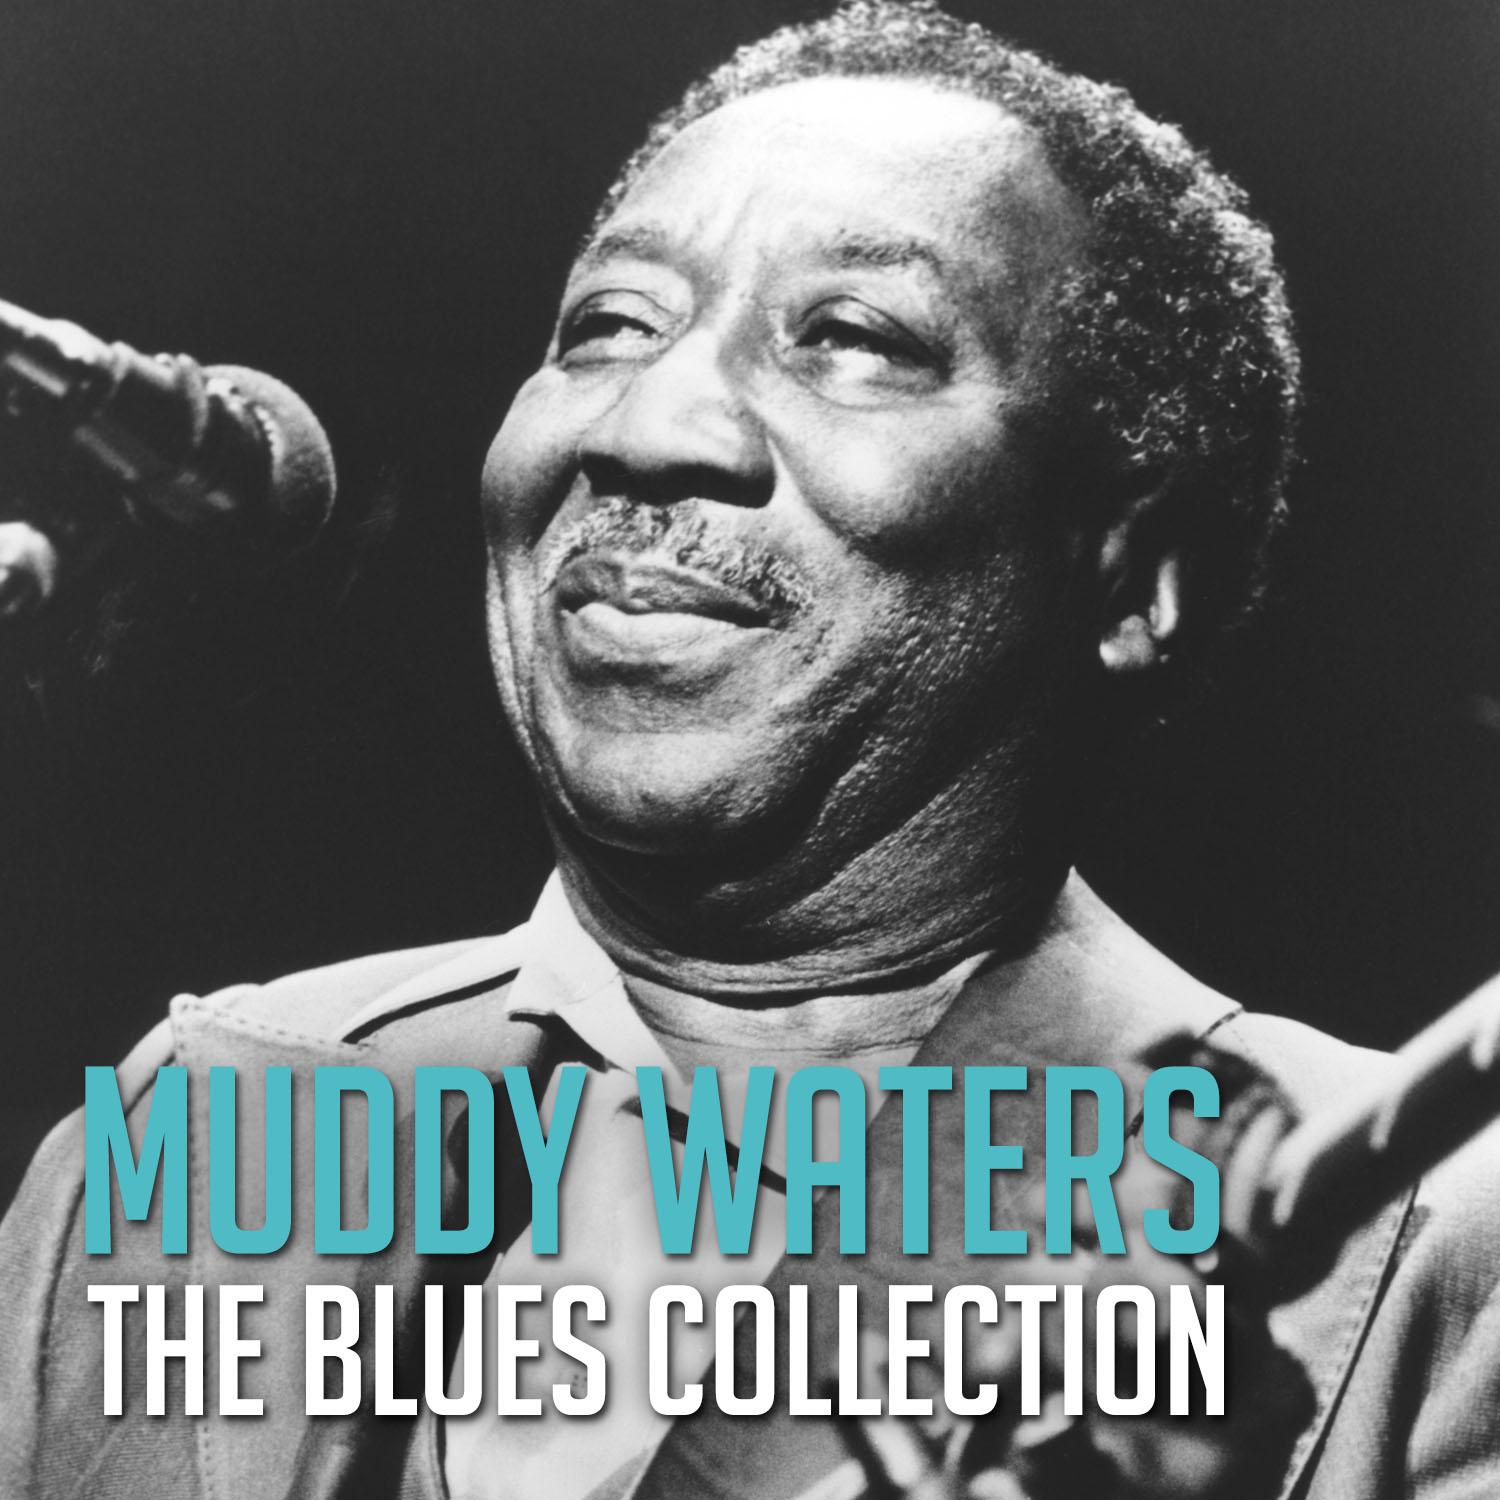 The Blues Collection: Muddy Waters